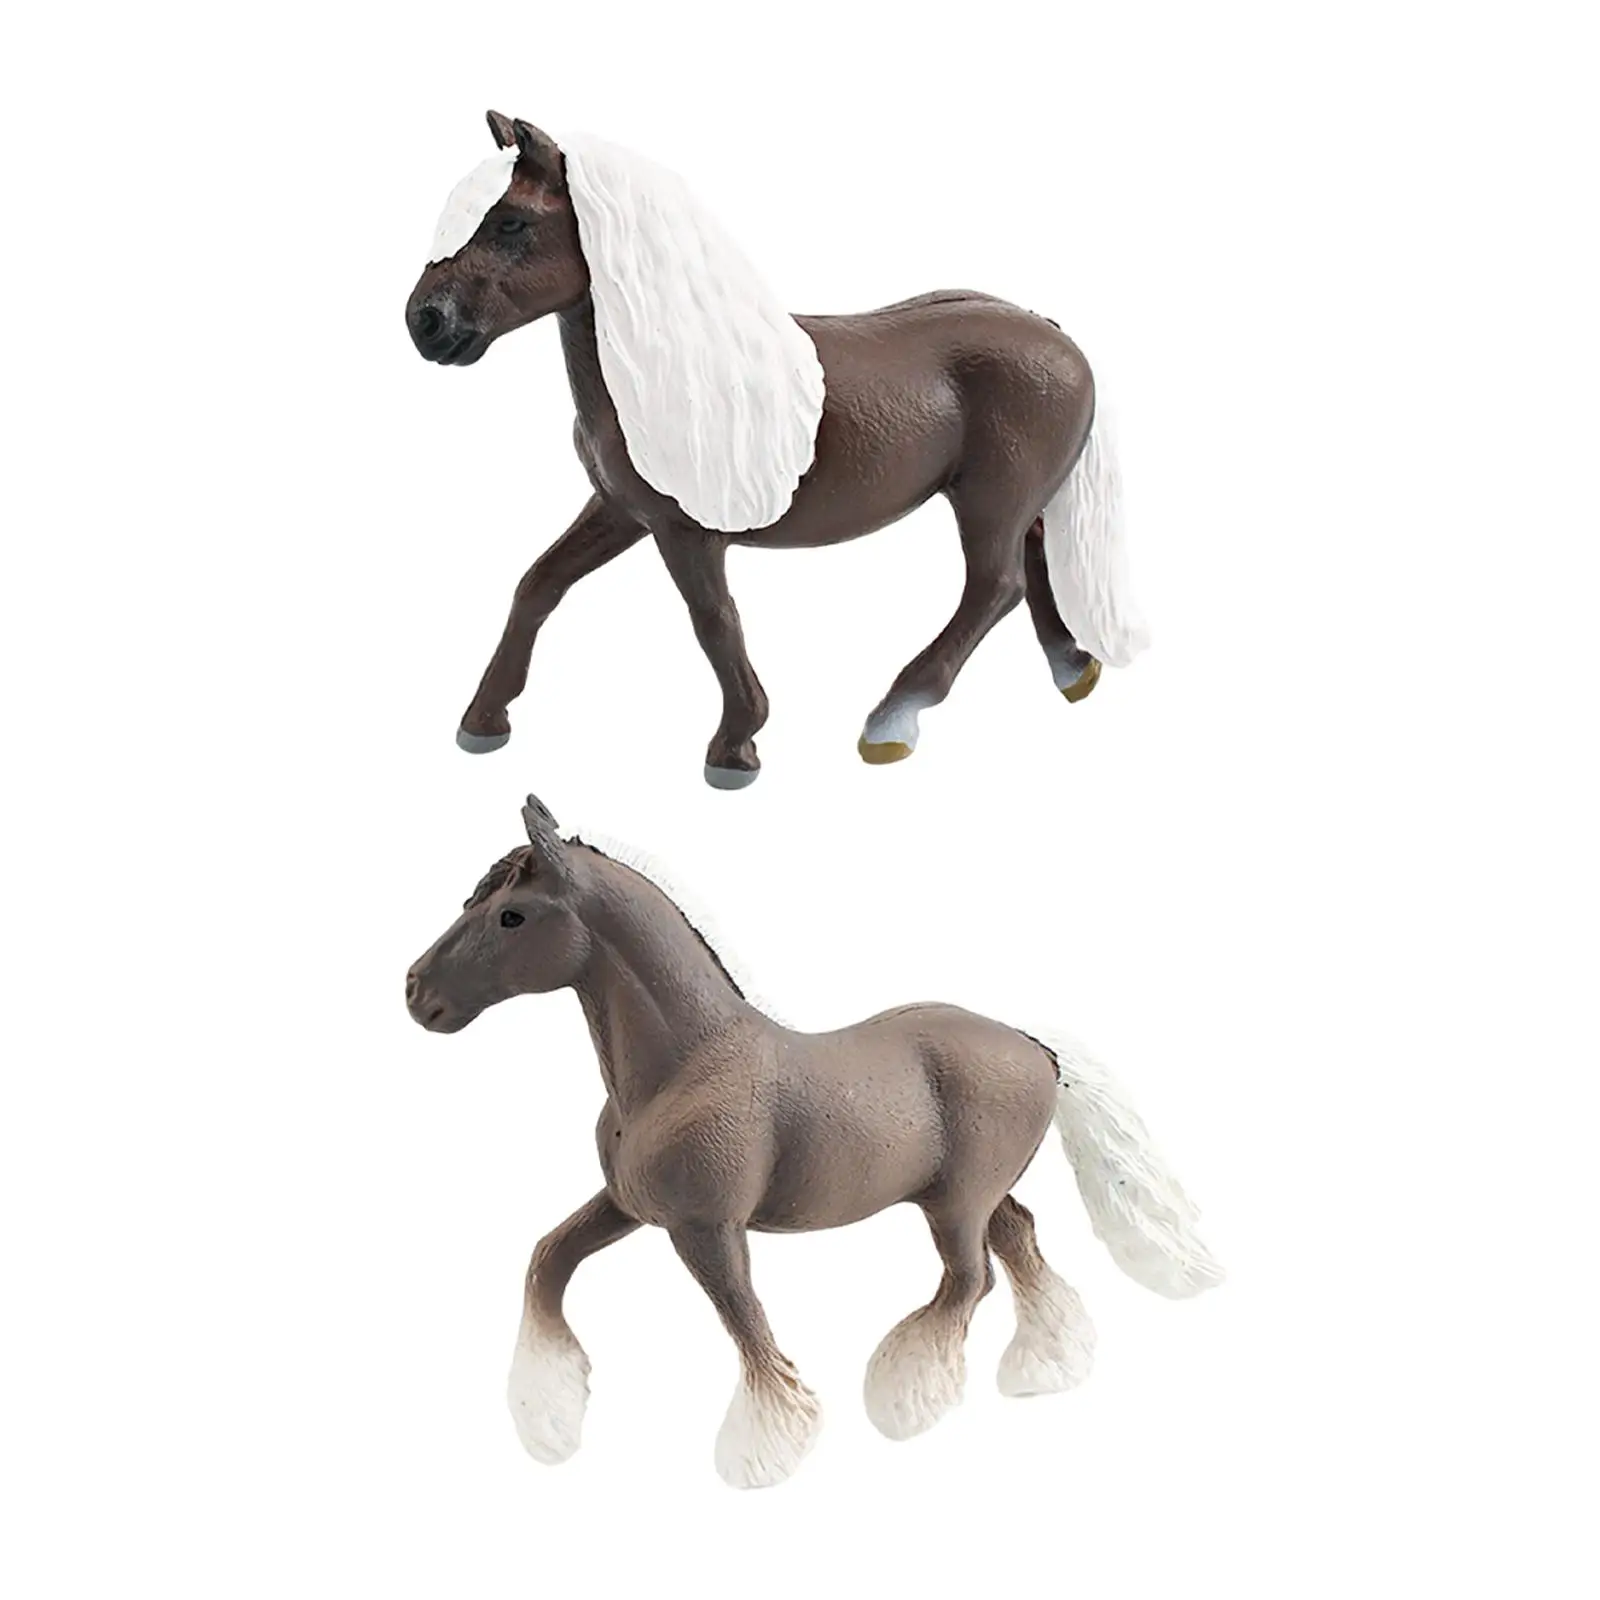 Animals Figures Simulation Horse Party Favors Educational Learning Toy Horse Toys for Desktop Decor Cake Toppers Ornament Family